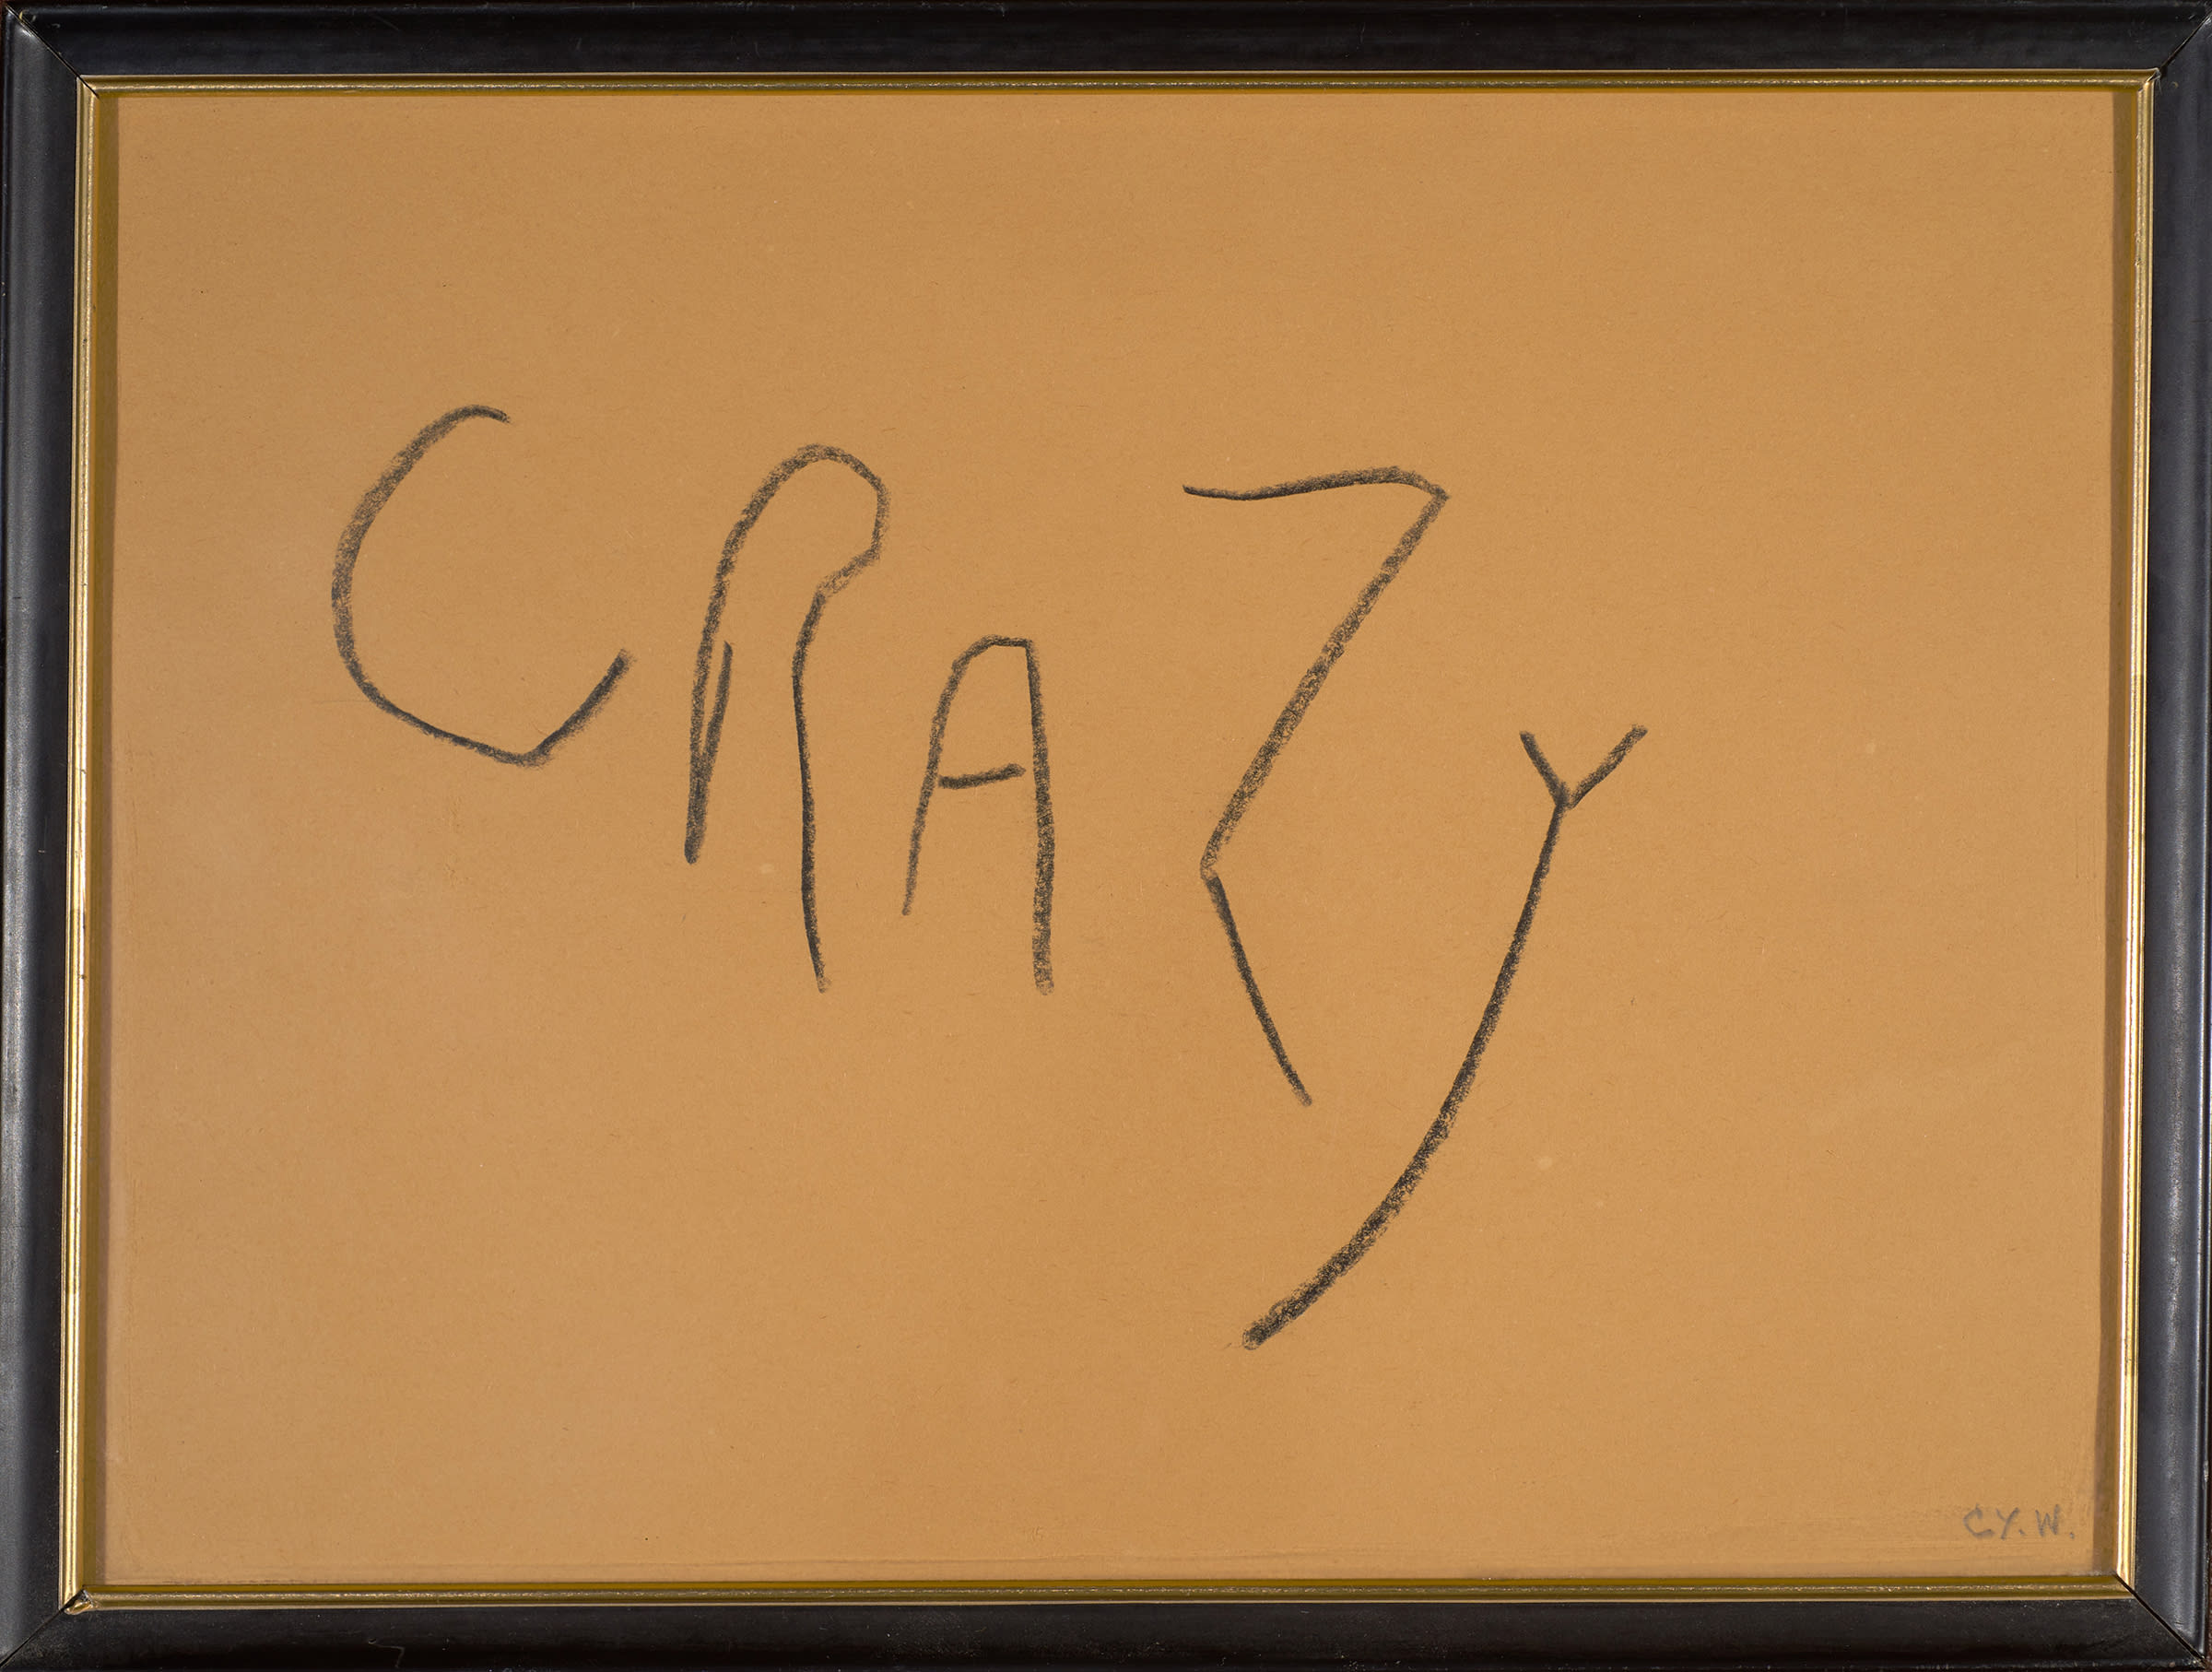 John Waters Senior, C-R-A-Z-Y, 1991. Collection of John Waters.